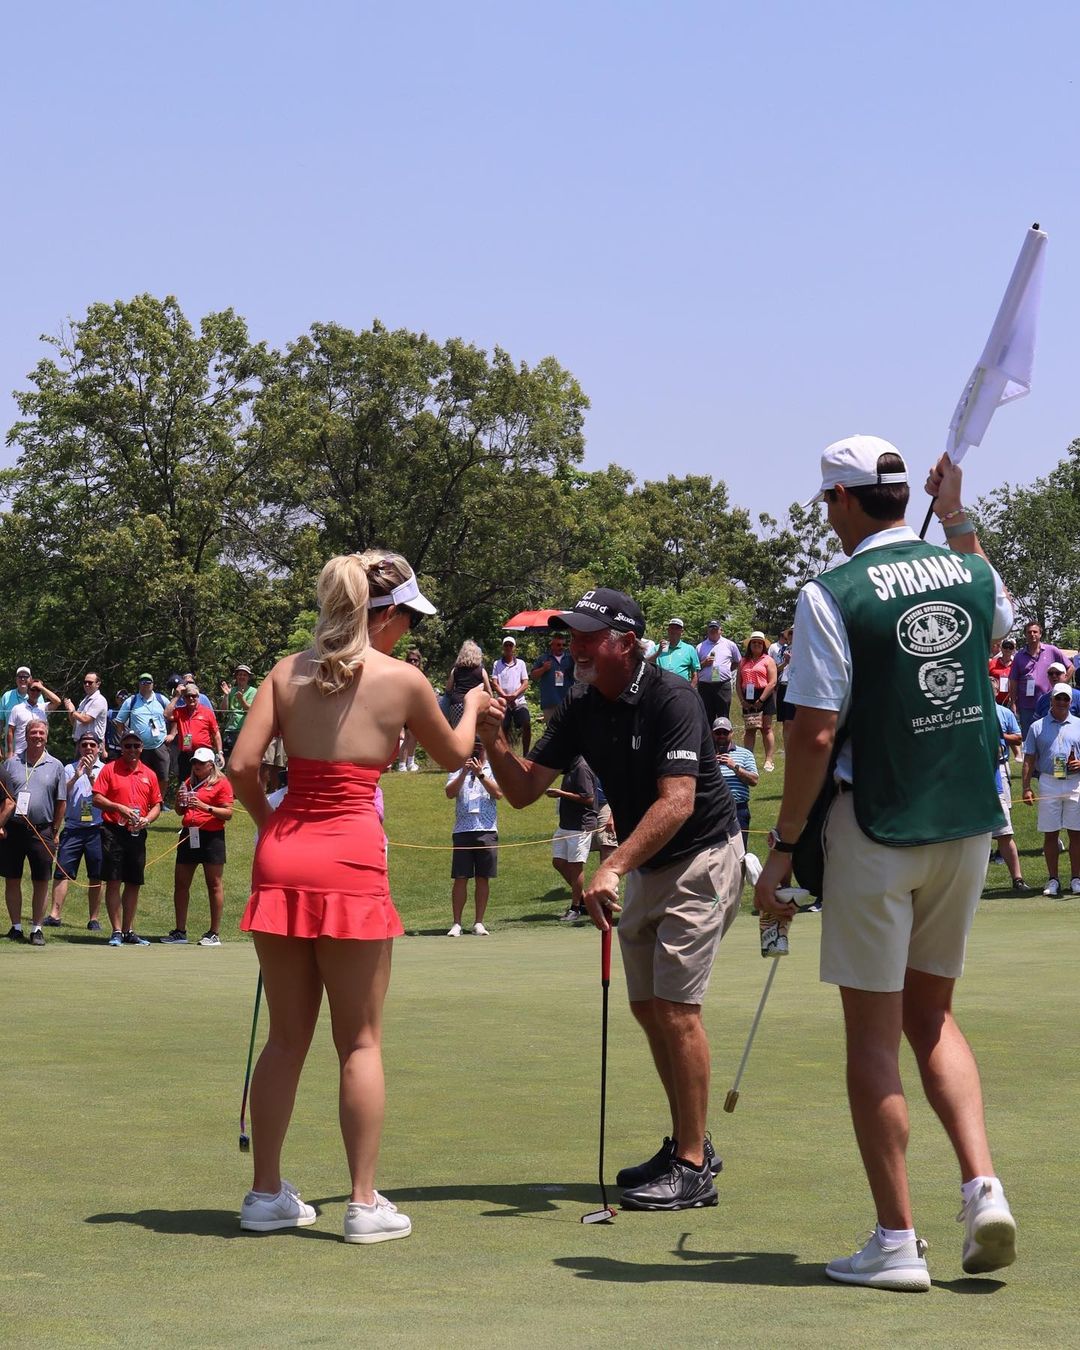 Paige Spiranac Grabs Some Beer and Wieners! - Photo 24